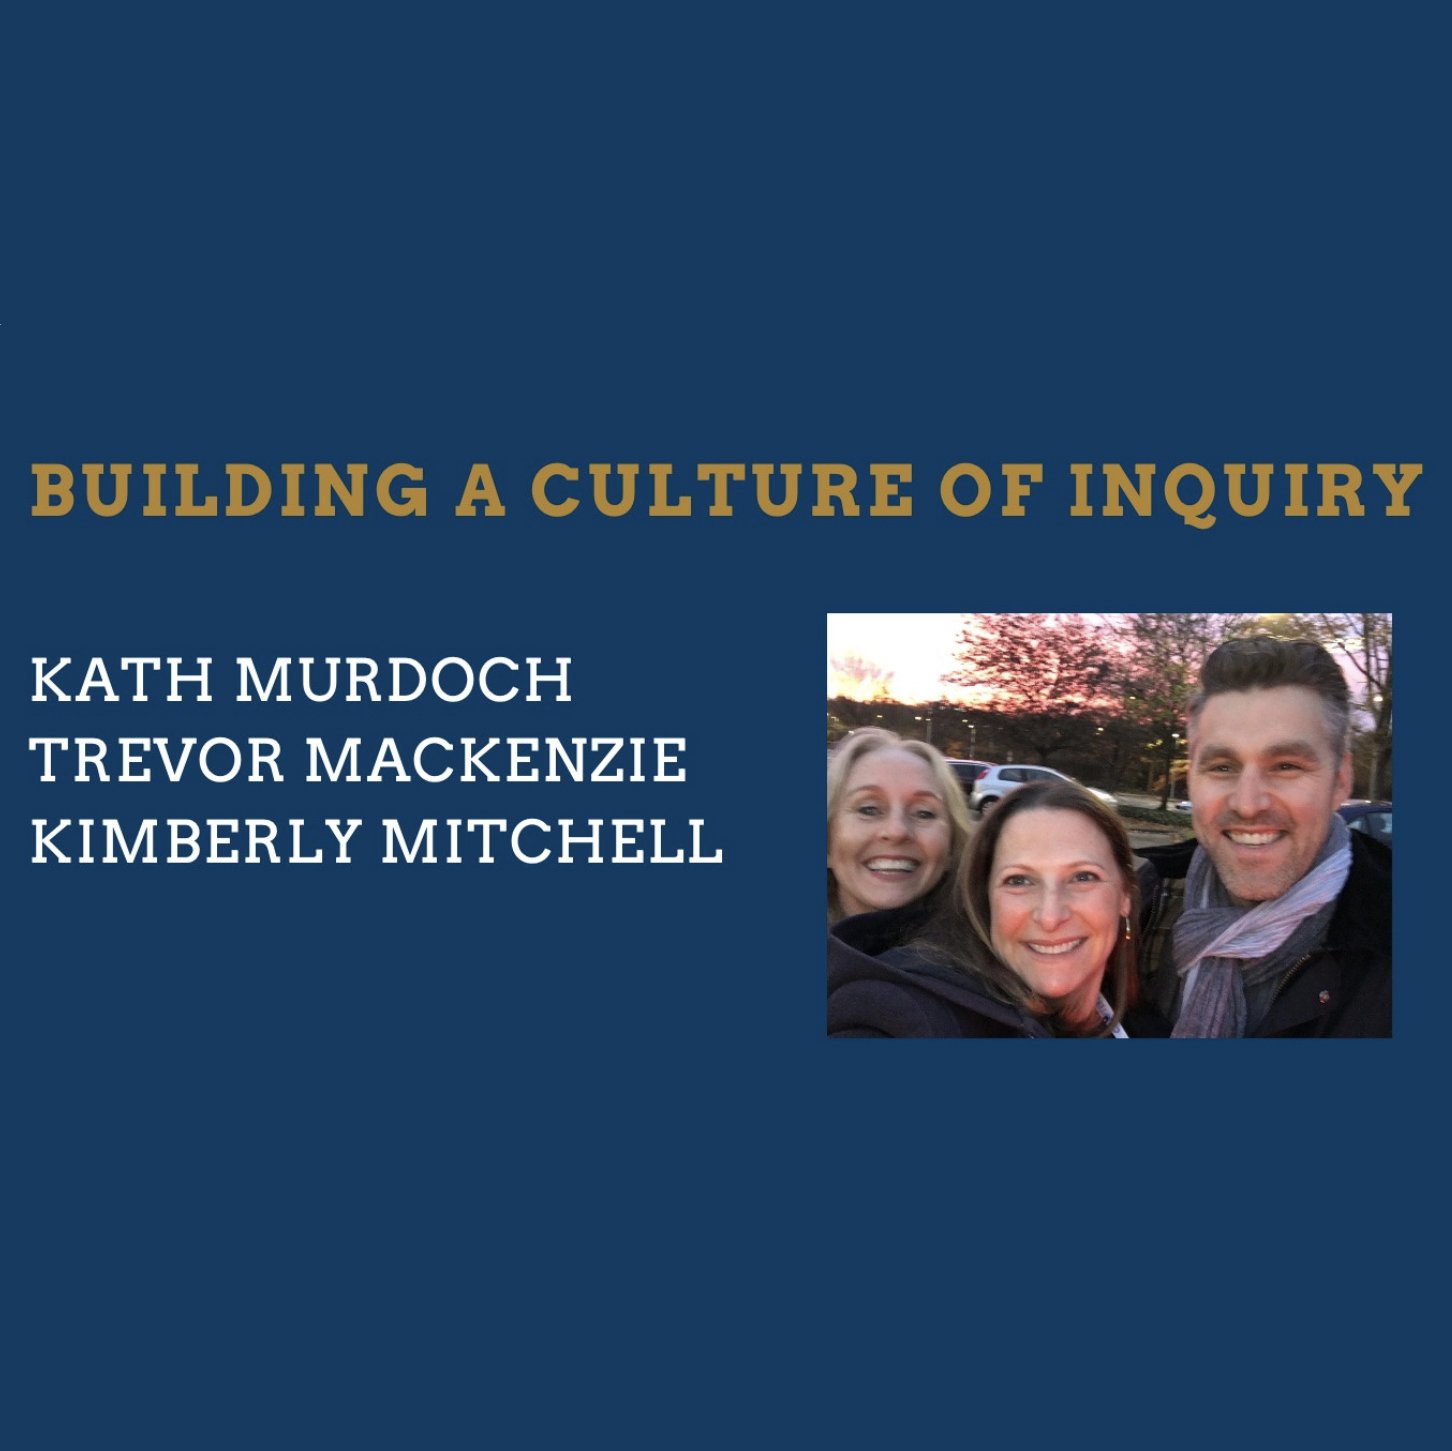 Building a Culture of Inquiry